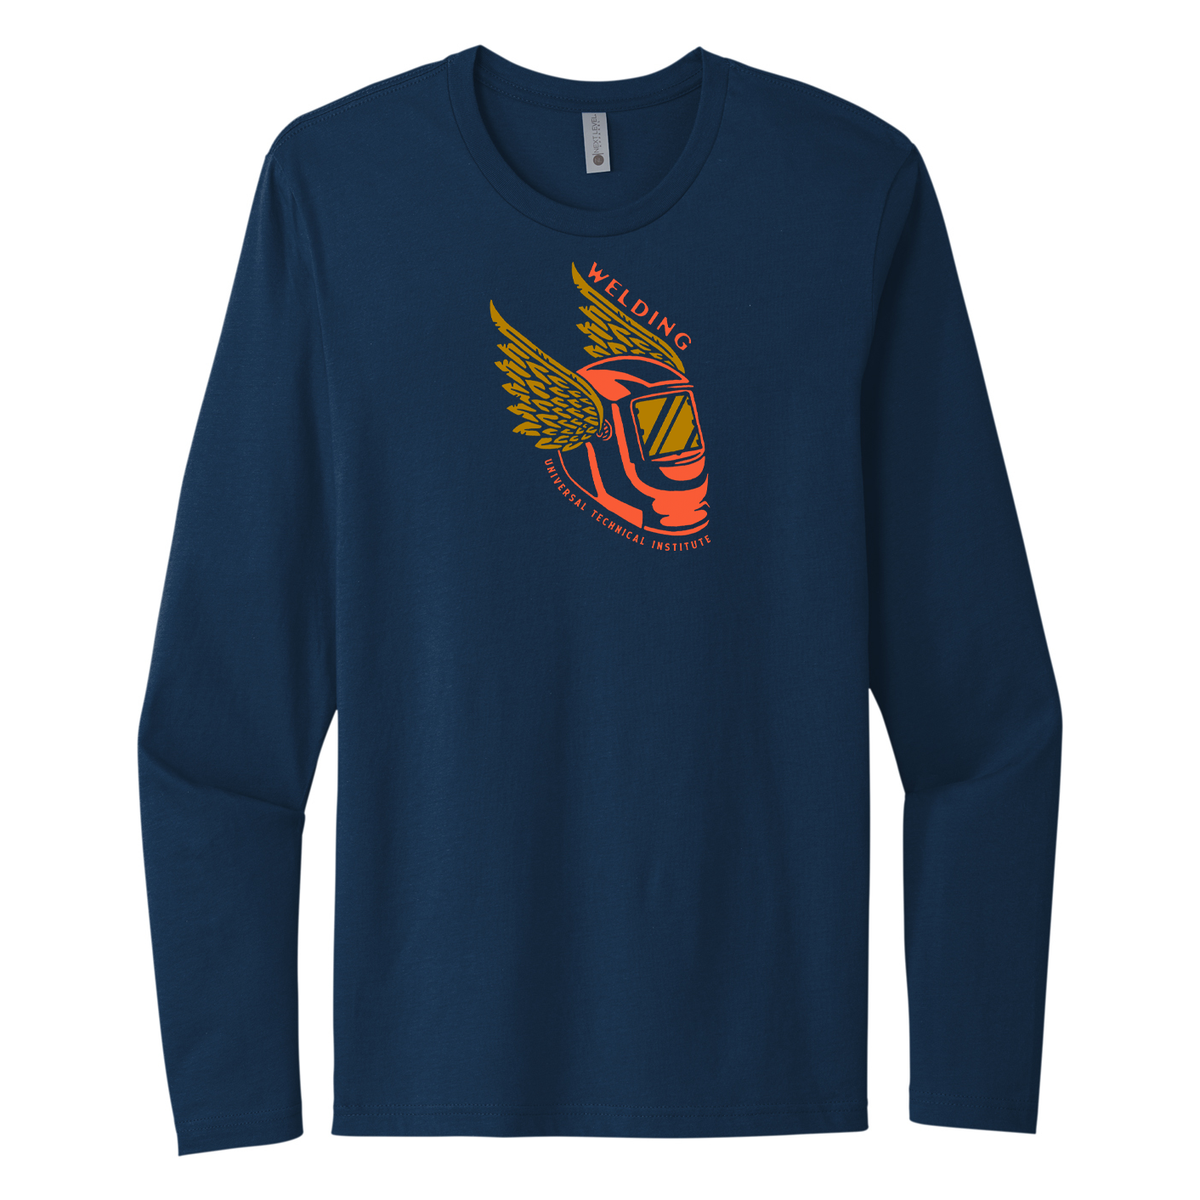 Welding Wings Graphic Long Sleeve T-Shirt